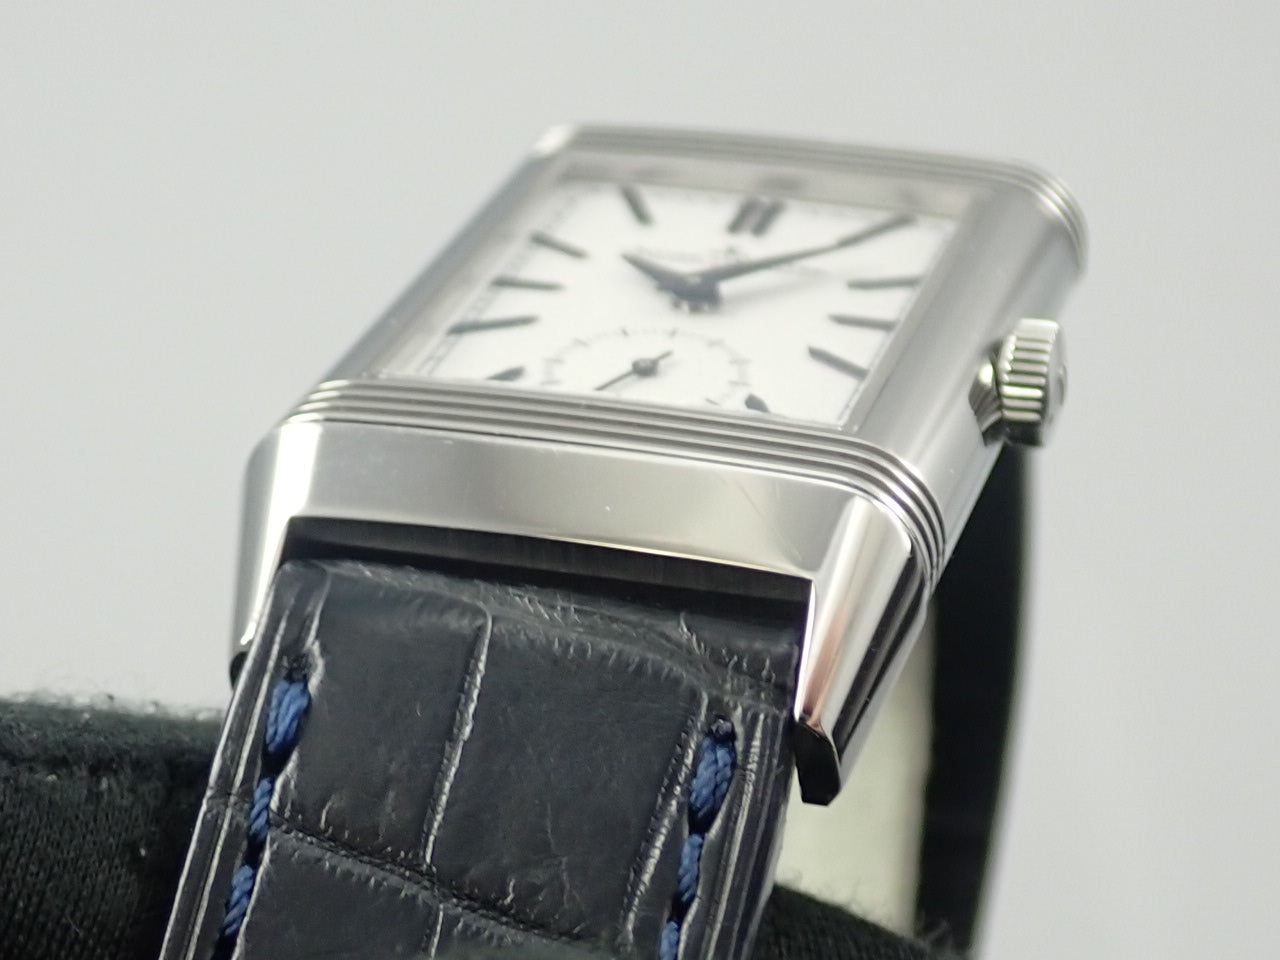 Jaeger-LeCoultre Reverso Tribute Duo &lt;Warranty Box and Others&gt;